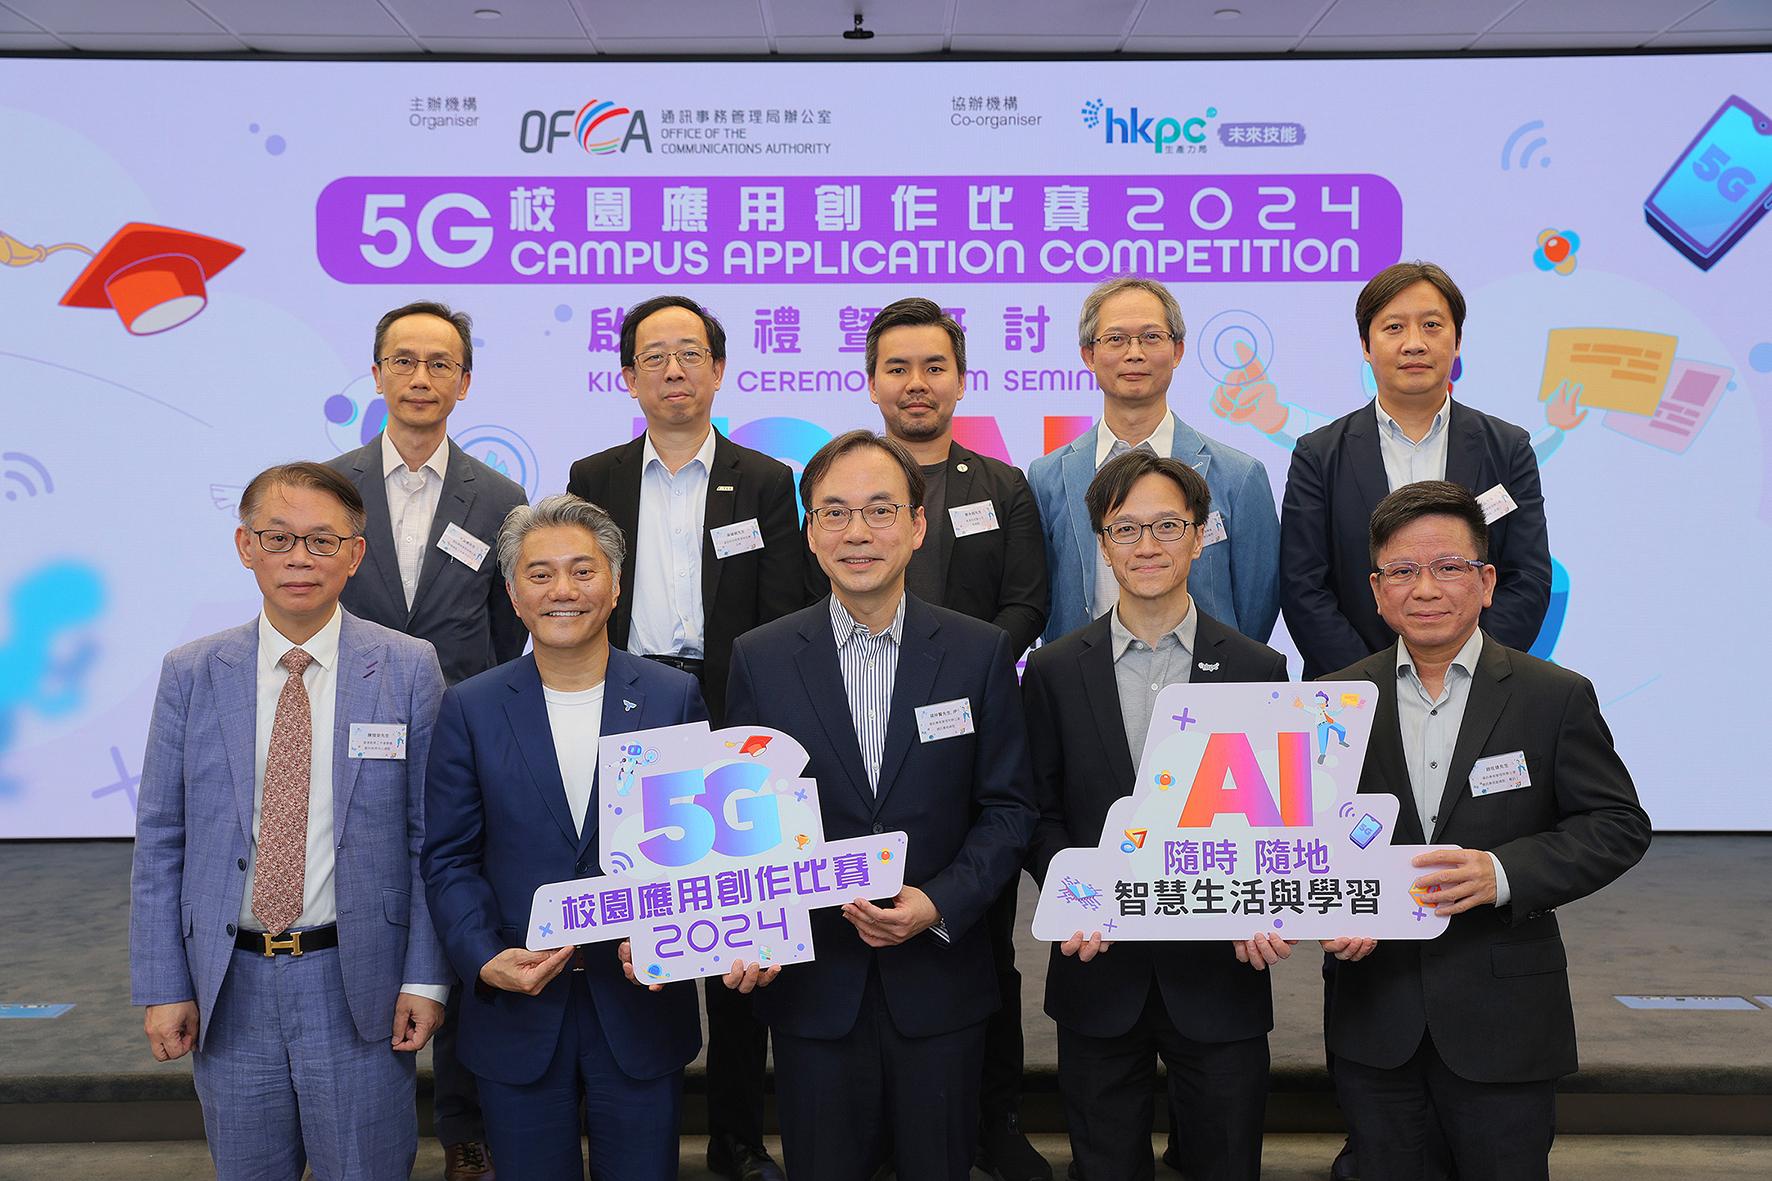 The Office of the Communications Authority held the Kick-off Ceremony cum Seminar of the second 5G Campus Application Competition today (May 18). Photo shows the Director-General of Communications, Mr Chaucer Leung (front row, centre), with the guests, speakers and representatives from supporting organisations at the ceremony.